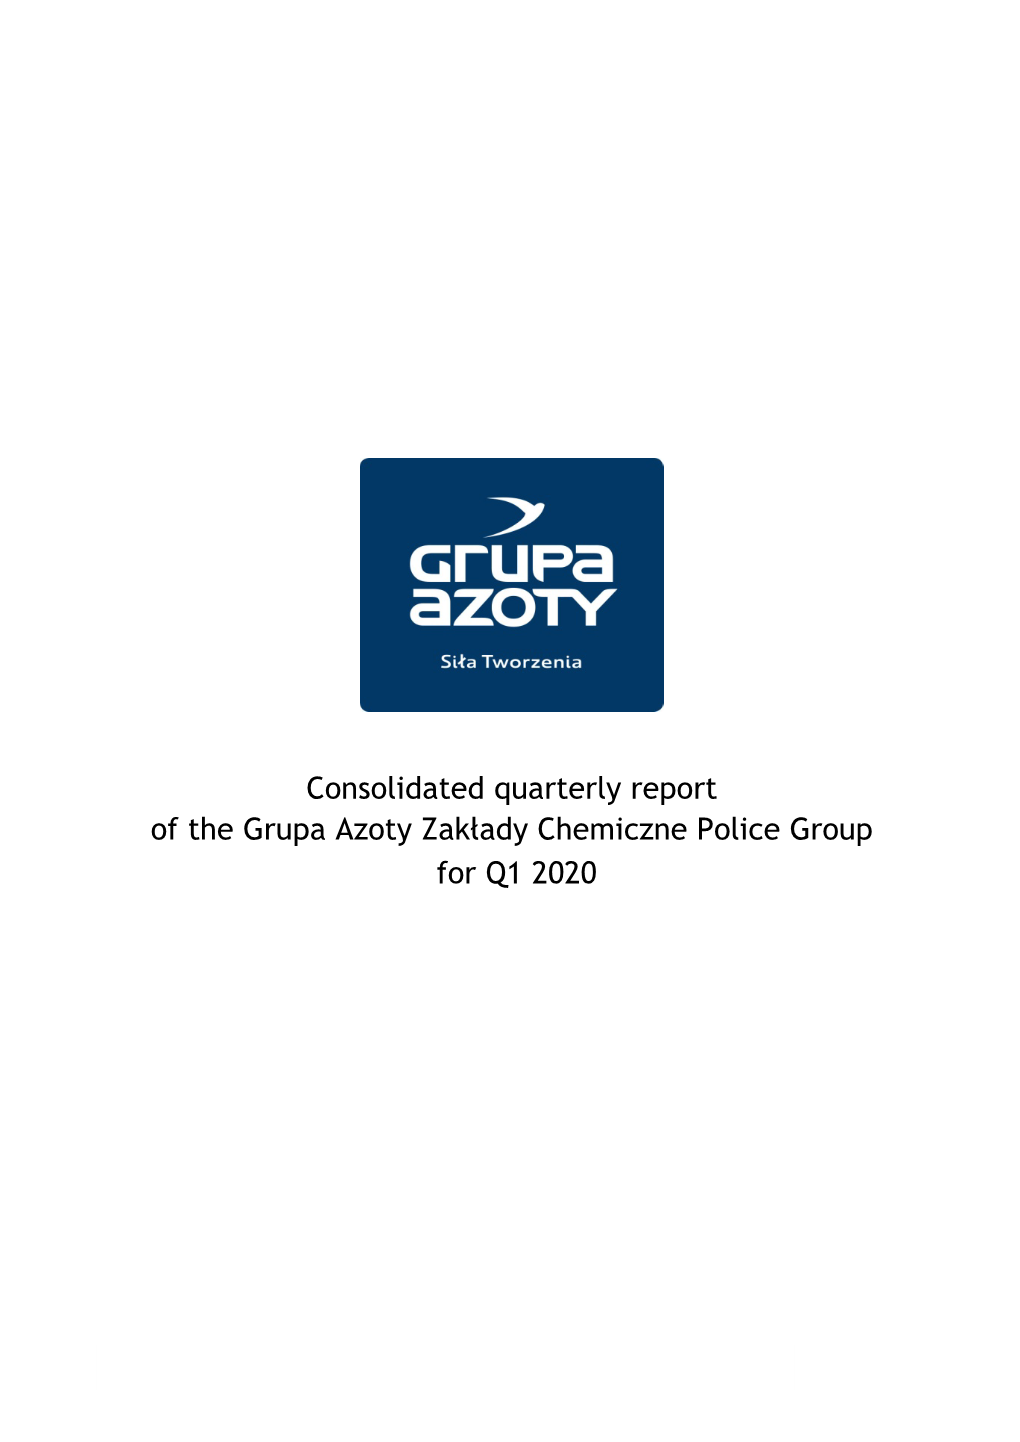 Consolidated Quarterly Report of the Grupa Azoty Zakłady Chemiczne Police Group for Q1 2020